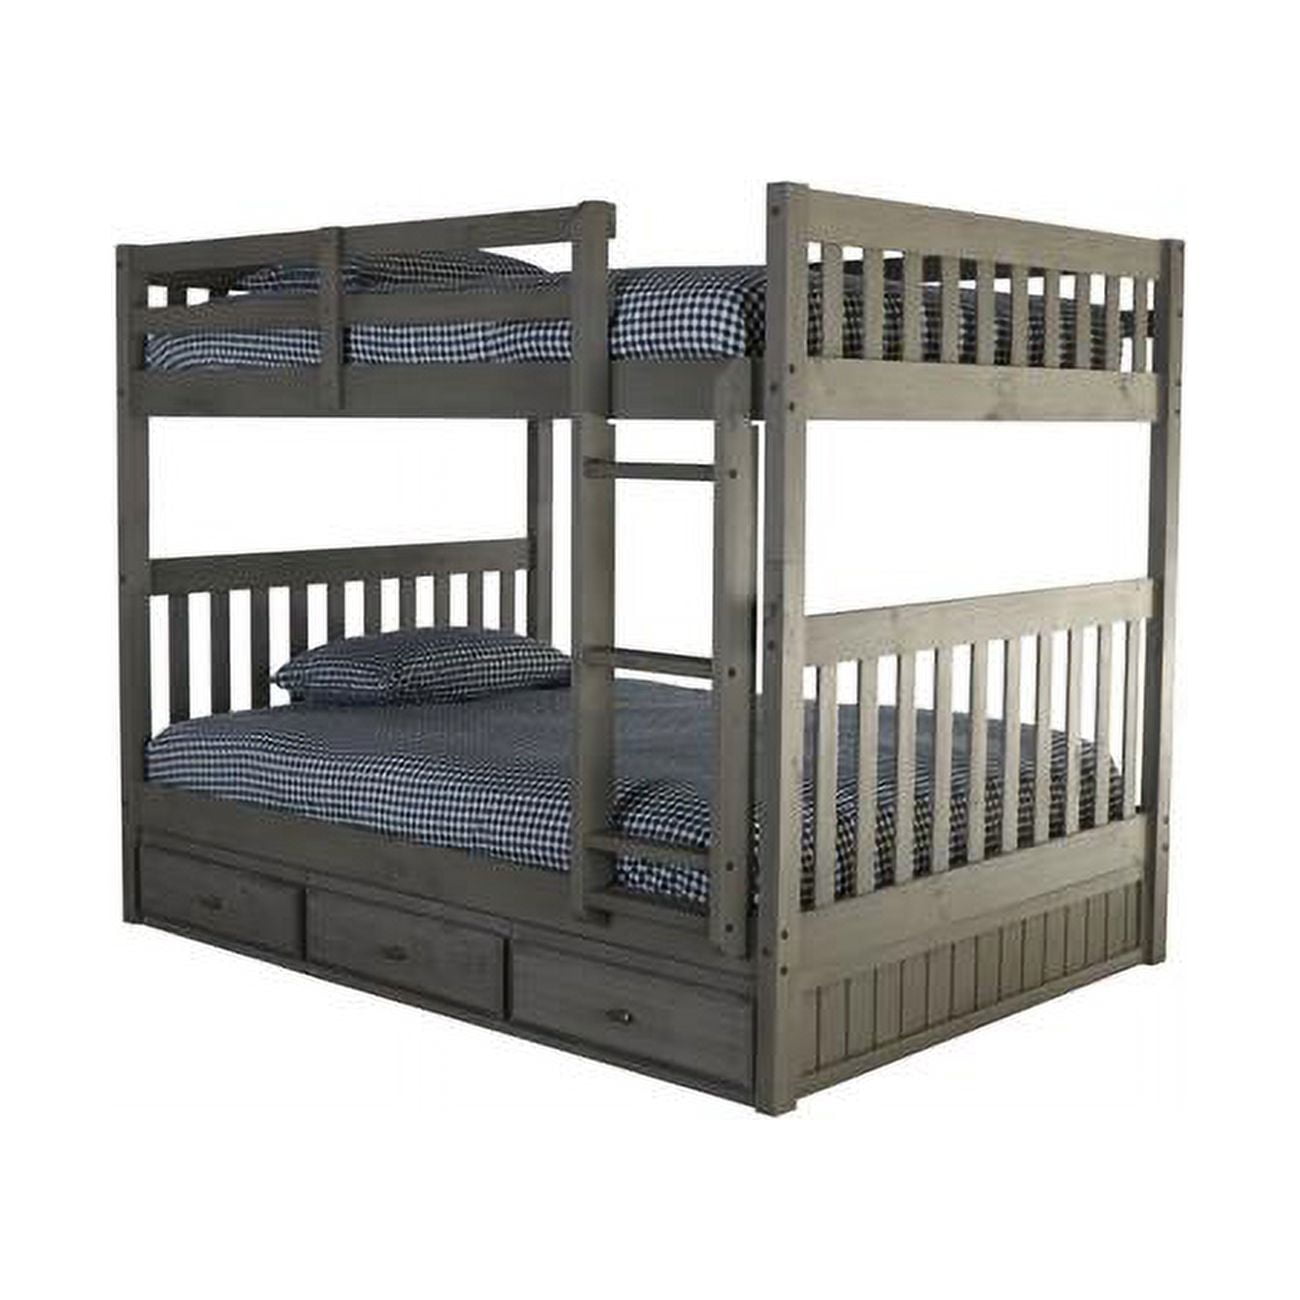 Picture of American Furniture Classics 83215-K3-KD 66 x 78 x 57 in. Full Over Full Bunk Bed with Three Underbed Drawers, Charcoal Gray